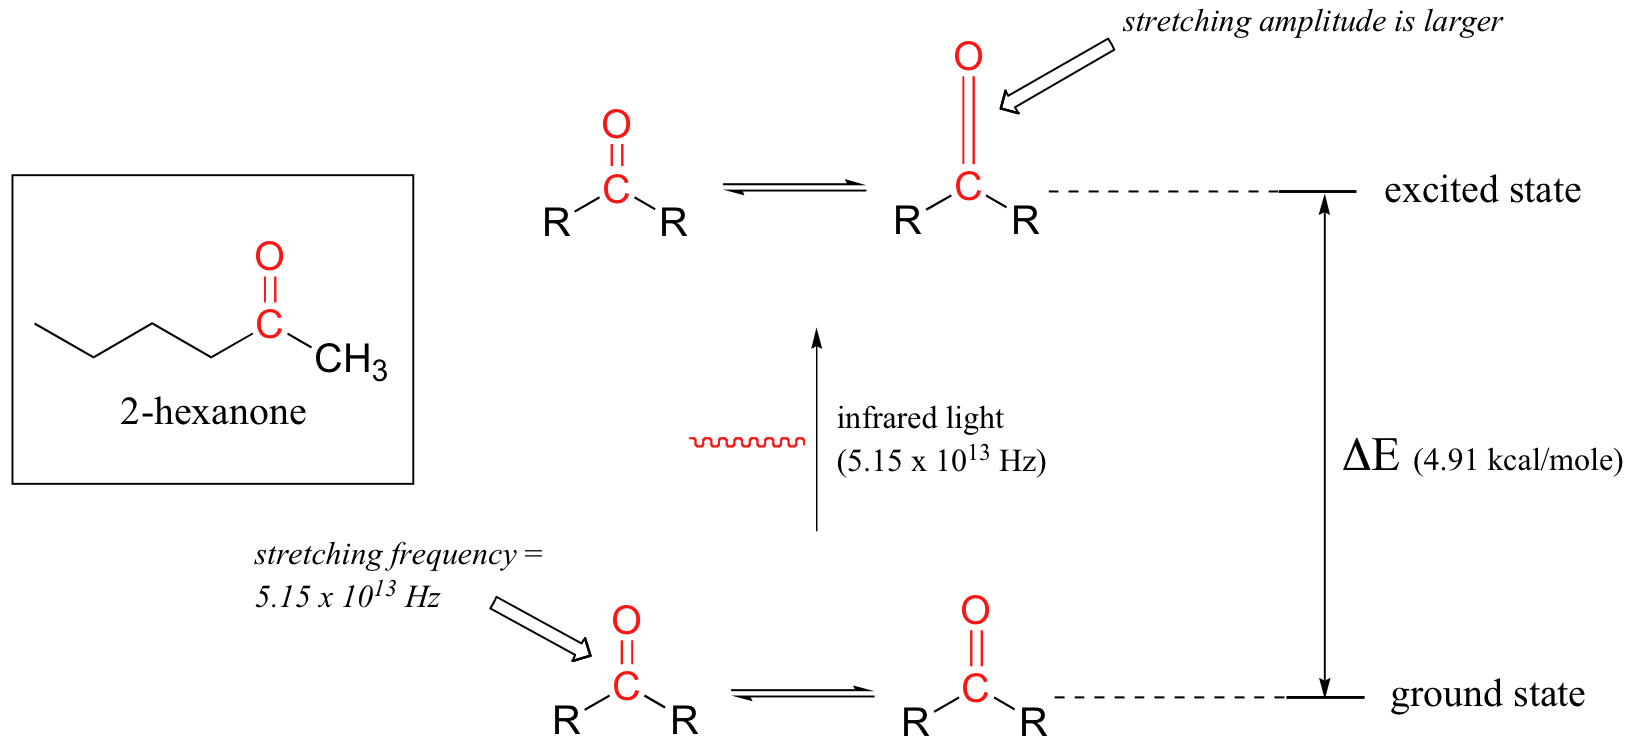 A diagram showing the excitation of carbonyl bond in 2-hexanone